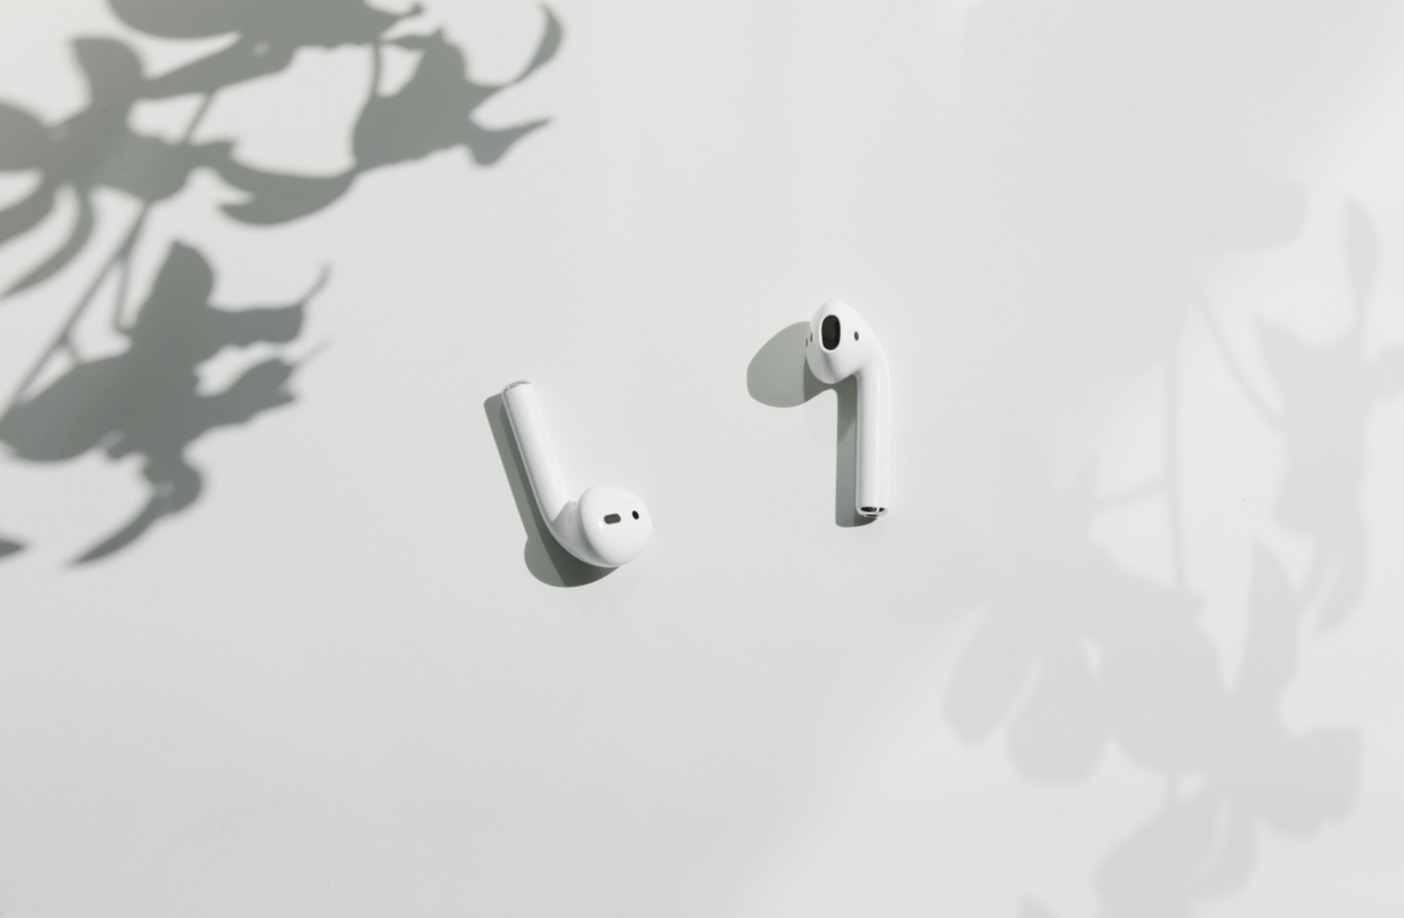 Image of two AirPods